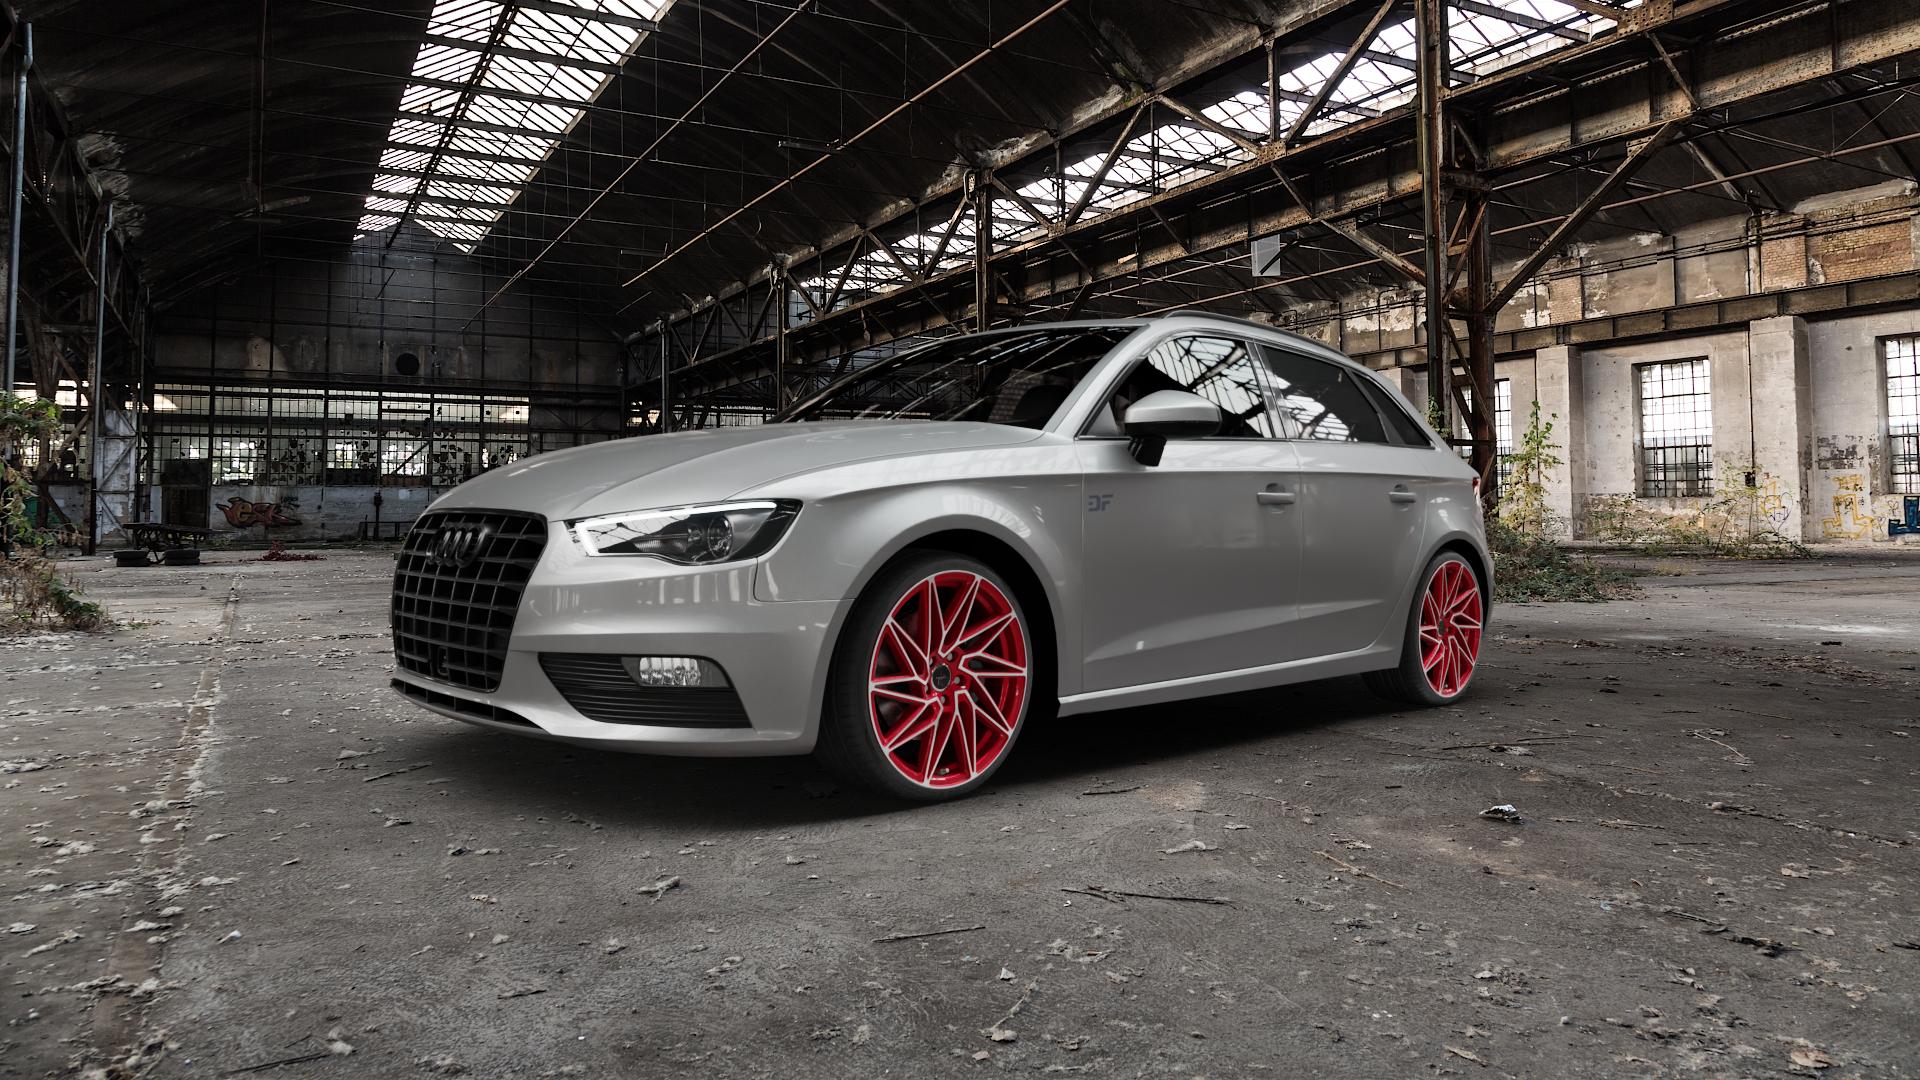 KESKIN KT20 CANDY RED FRONT POLISH Felge mit Reifen rot in 19Zoll Winterfelge Alufelge auf silbernem Audi A3 Typ 8V (Sportback) 1,4l TFSI 90kW (122 PS) 1,8l 132kW (179 1,6l TDI 77kW (105 2,0l 110kW (150 quattro 221kW S3 (300 103kW (140 1,2l 135kW (184 81kW (110 ⬇️ mit 15mm Tieferlegung ⬇️ Old Industrial Hall_max5000mm_2022 Frontansicht_1